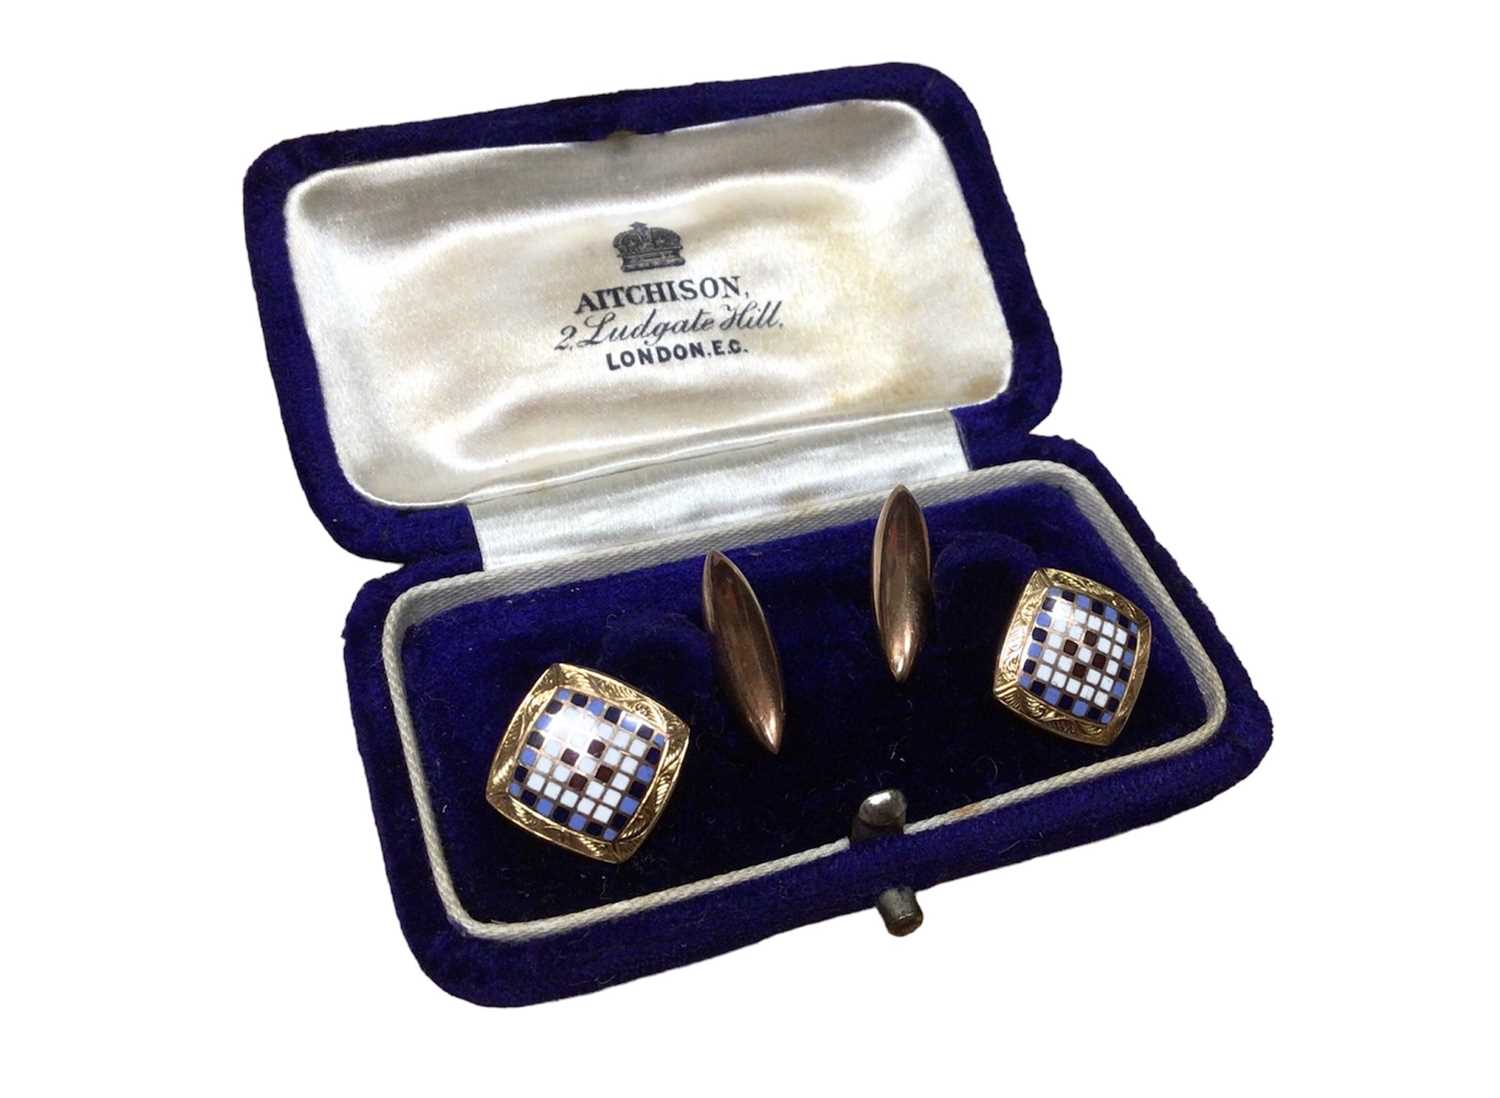 Good quality pair of 9ct gold cufflinks with enamelled chequerboard pattern